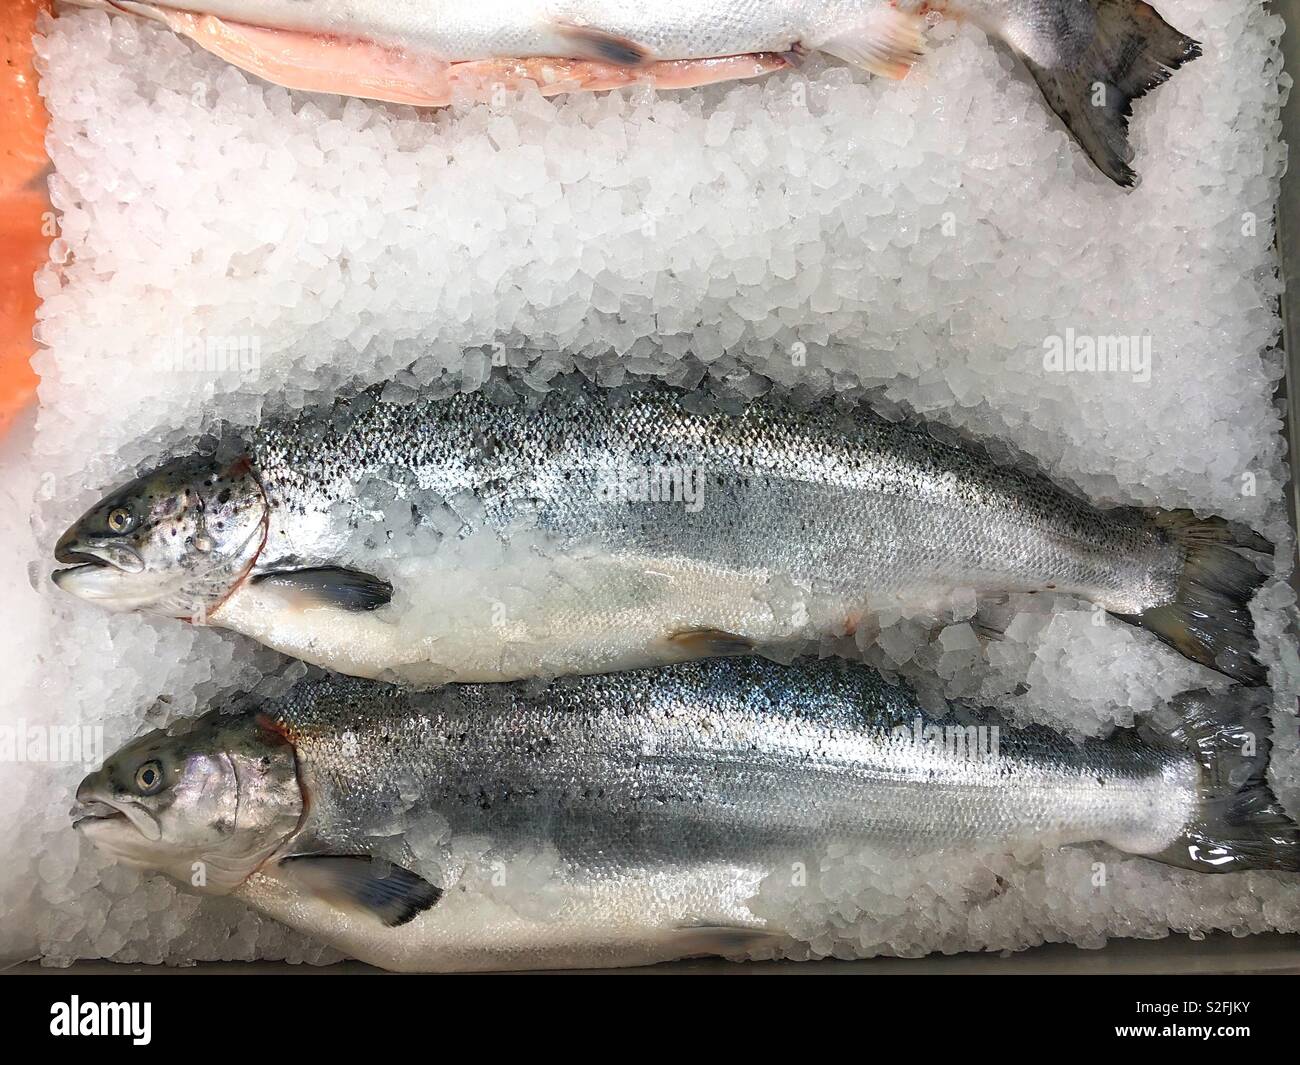 Farmed Scottish Salmon resting on a bed of crushed ice in a supermarket display. Stock Photo